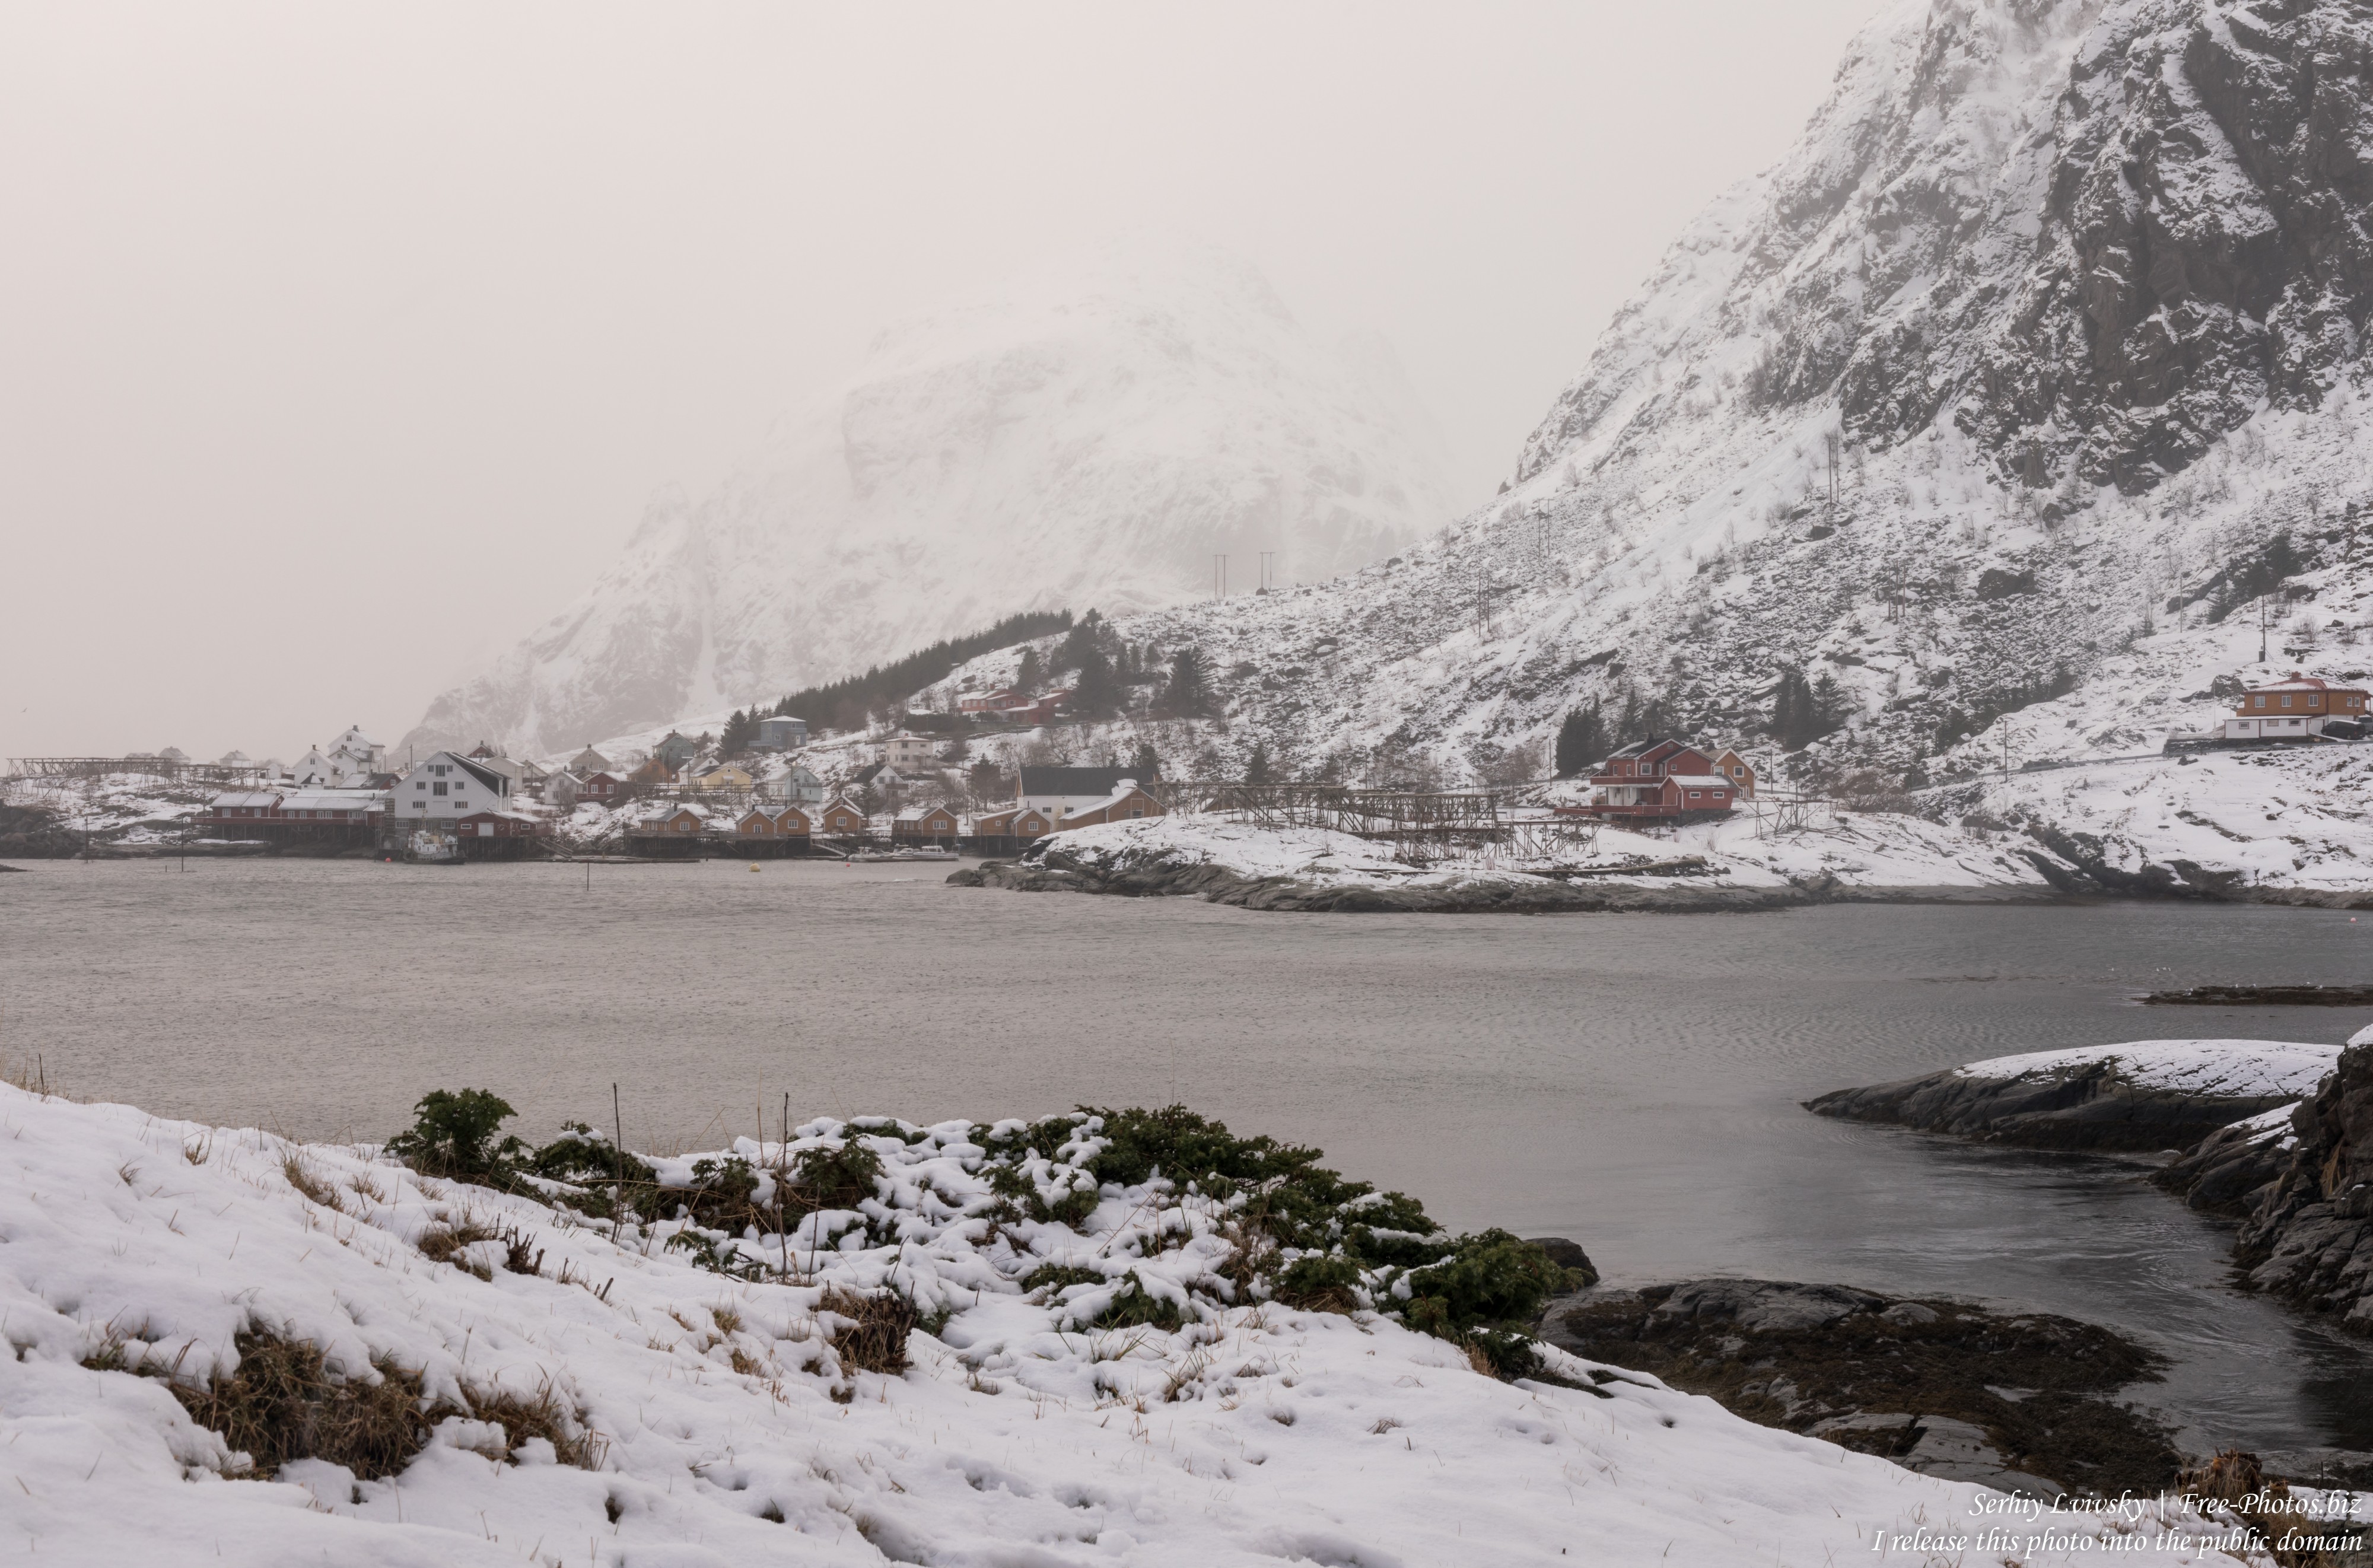 Å i Lofoten, Norway, in February 2020, photographed by Serhiy Lvivsky, picture 14